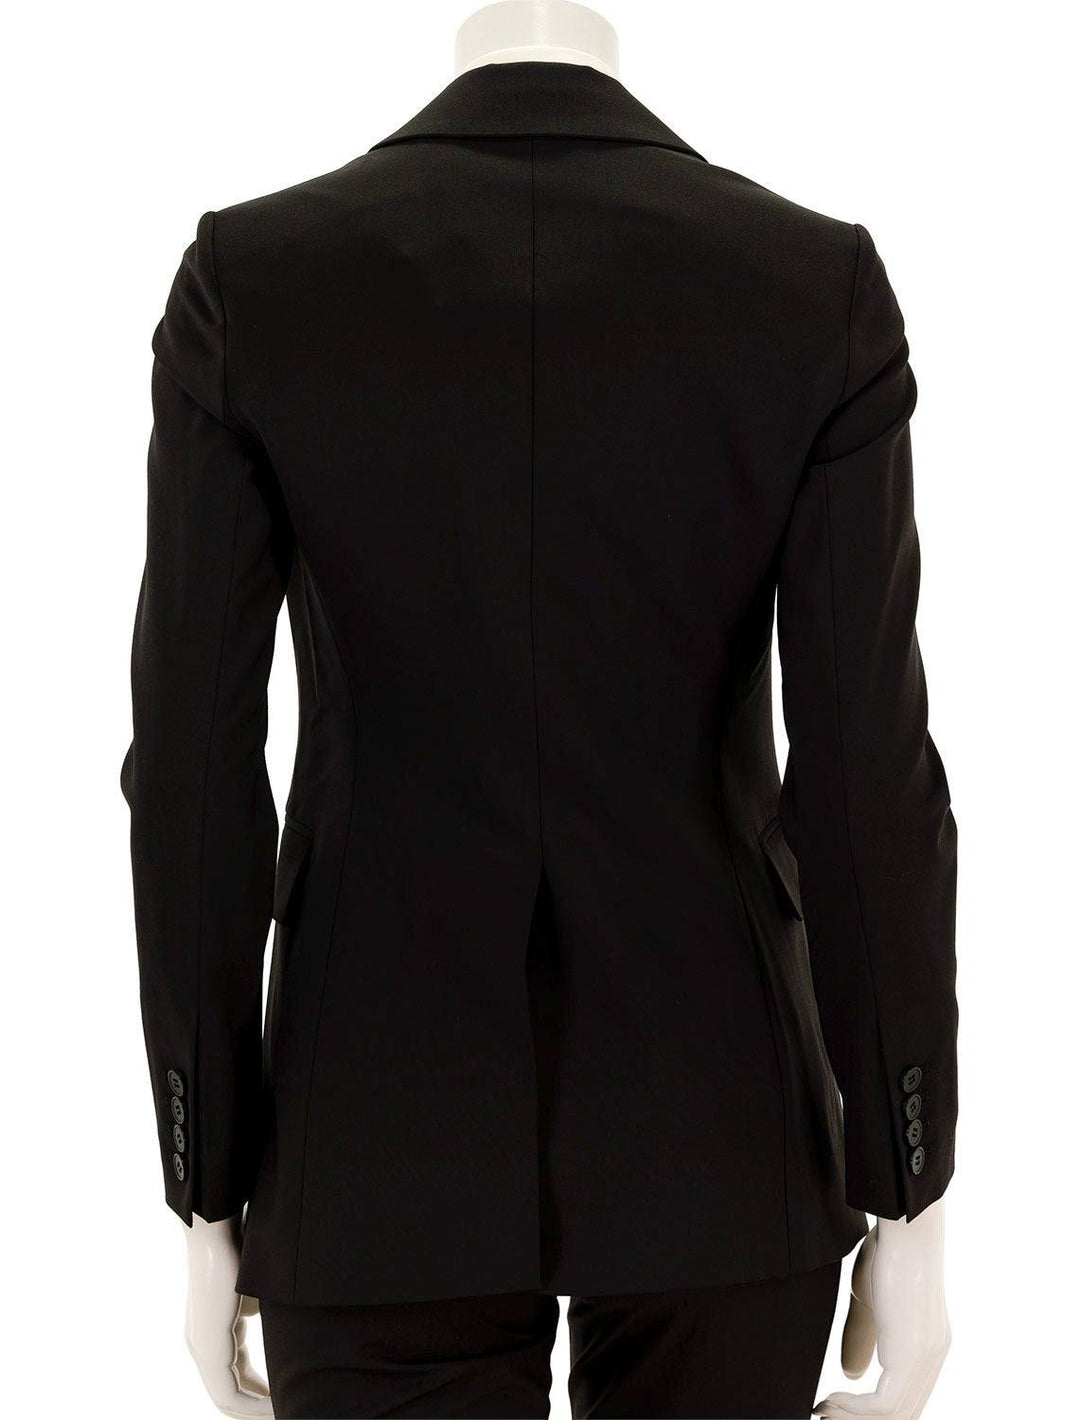 Back view of Theory's etiennette blazer in black.